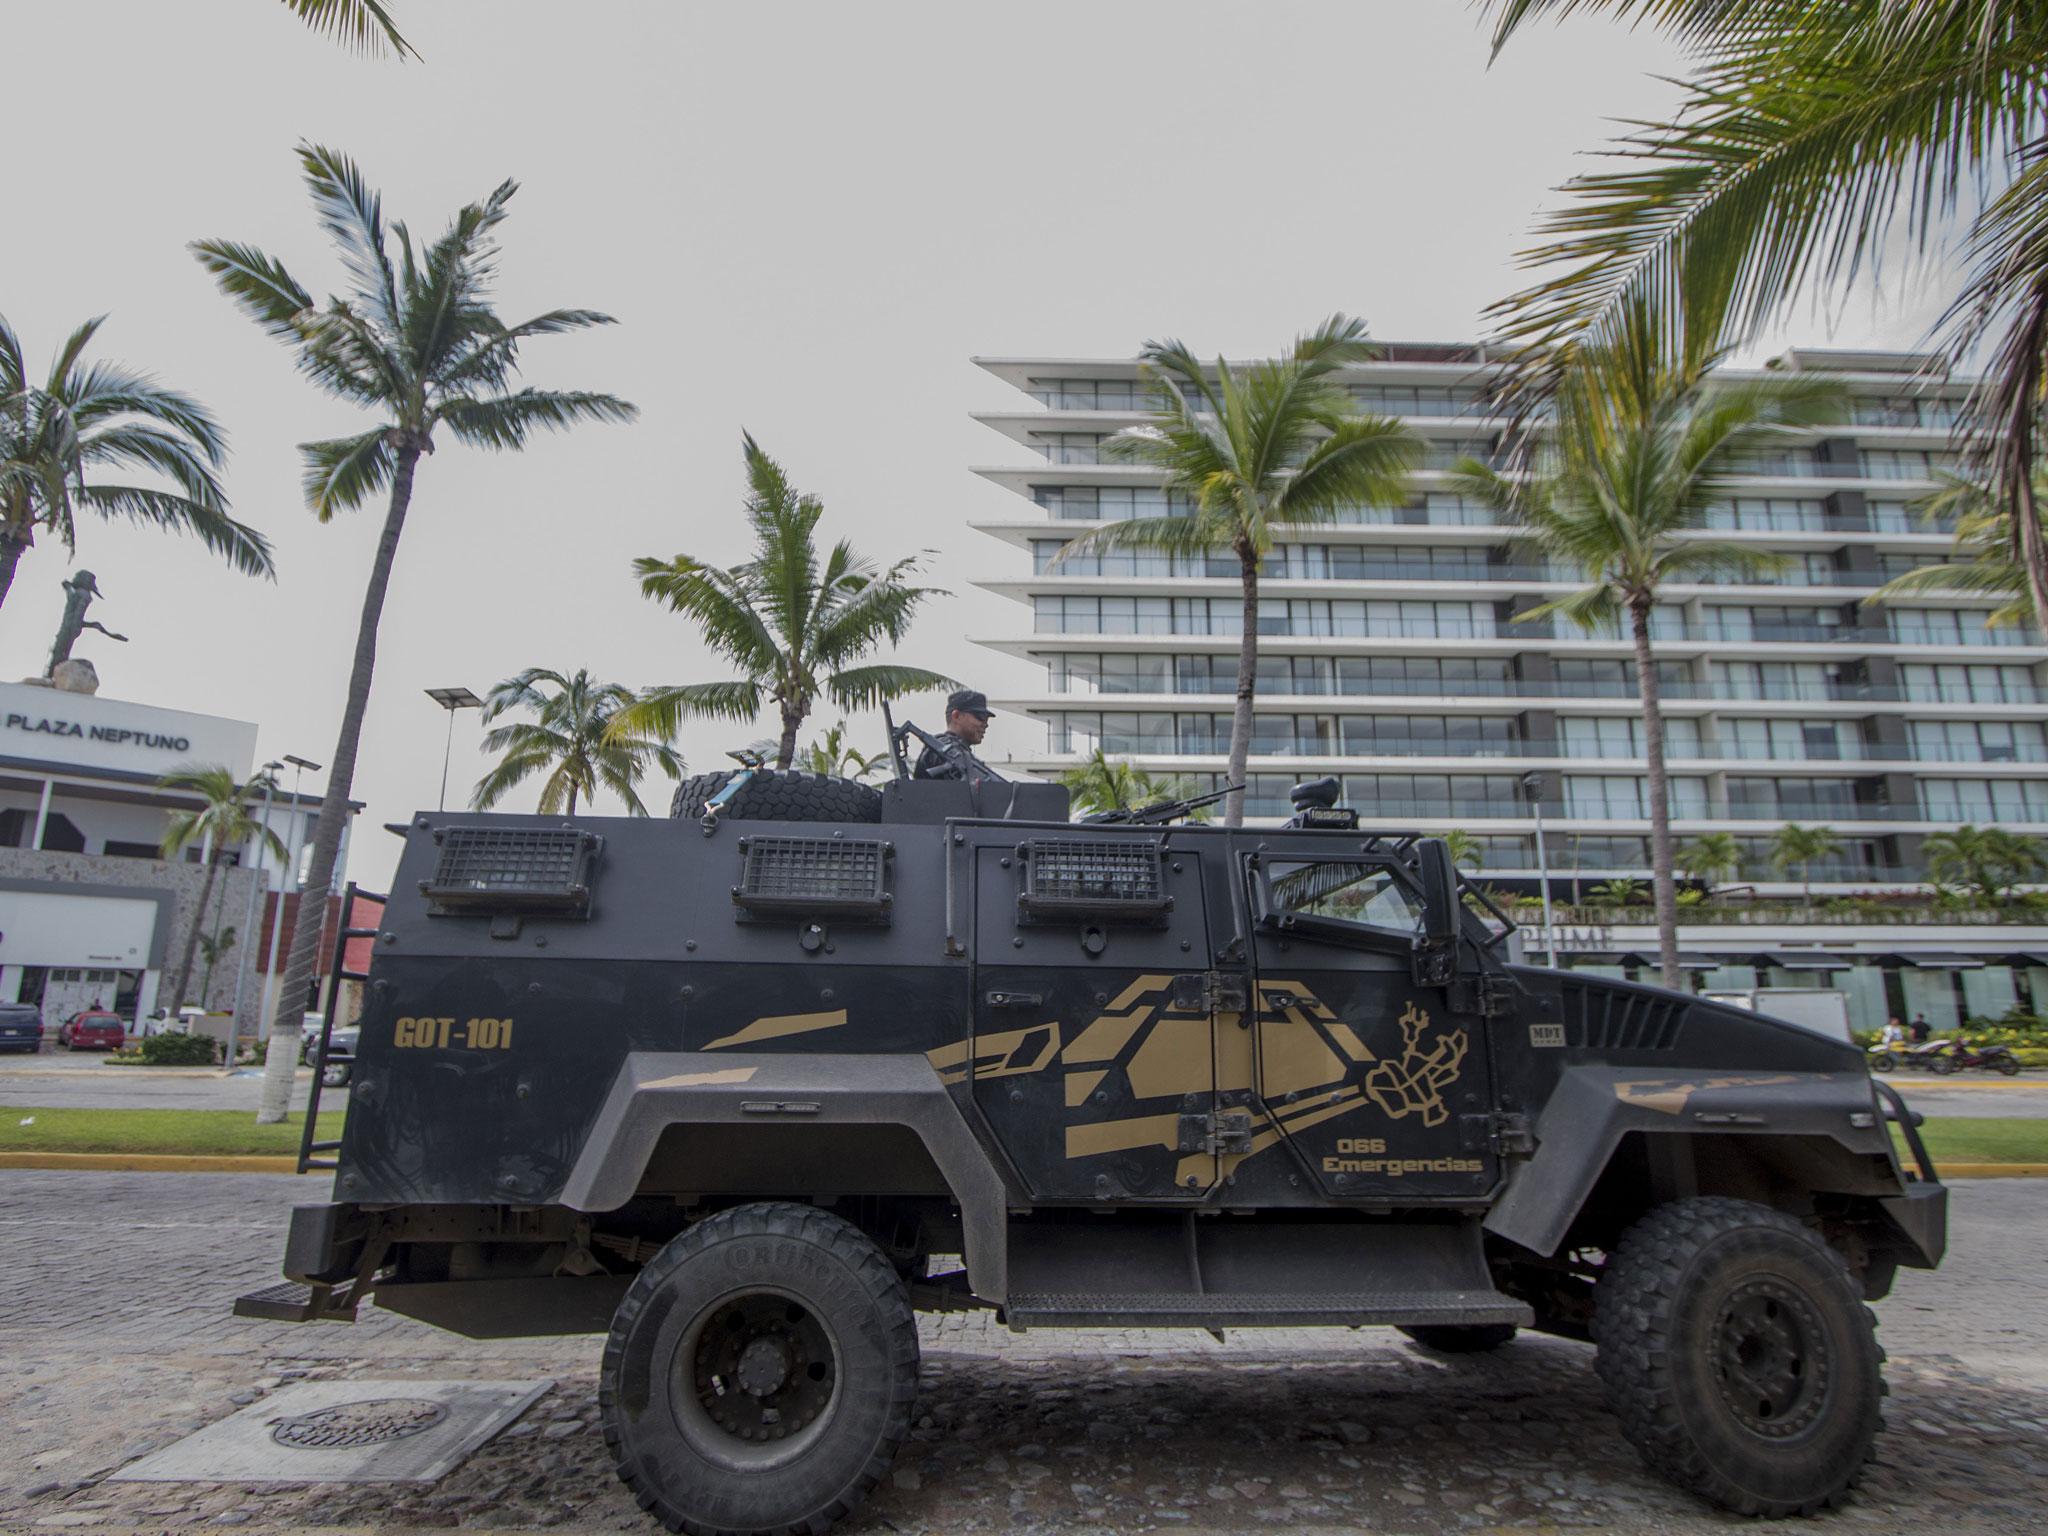 An armoured state police vehicle patrols outside of the restaurant, La Leche, after the kidnapping of El Chapo's son Hector Guerrero/Getty